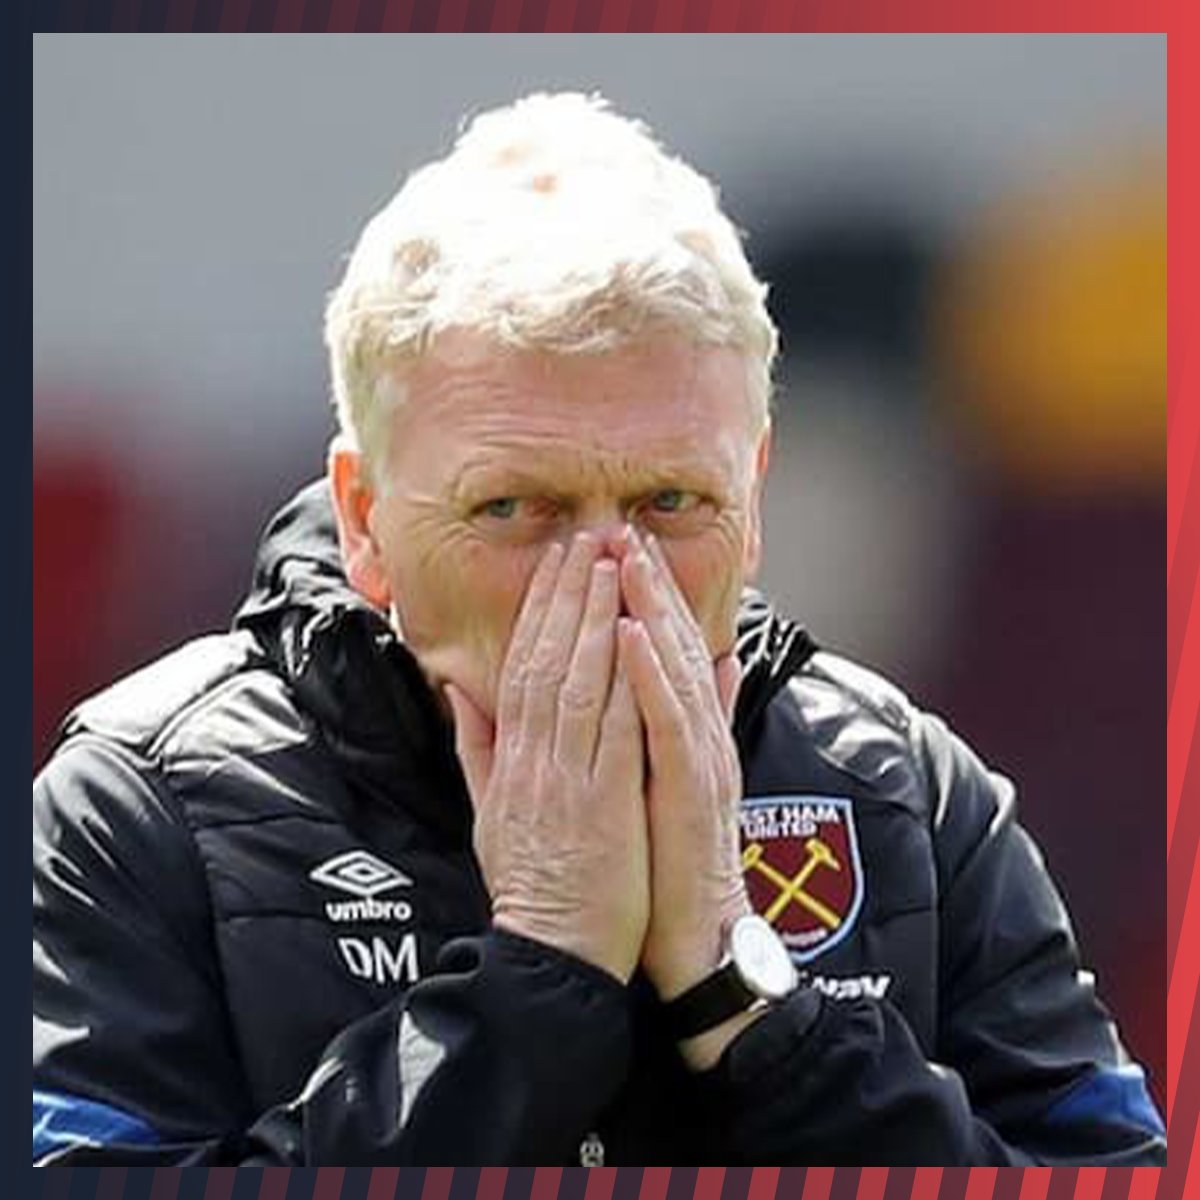 West Ham conceded 7⃣0⃣ Premier League goals this season, their joint-most in a single campaign in the competition. Not the final season Moyes would have hoped for. 😬 #WHUFC